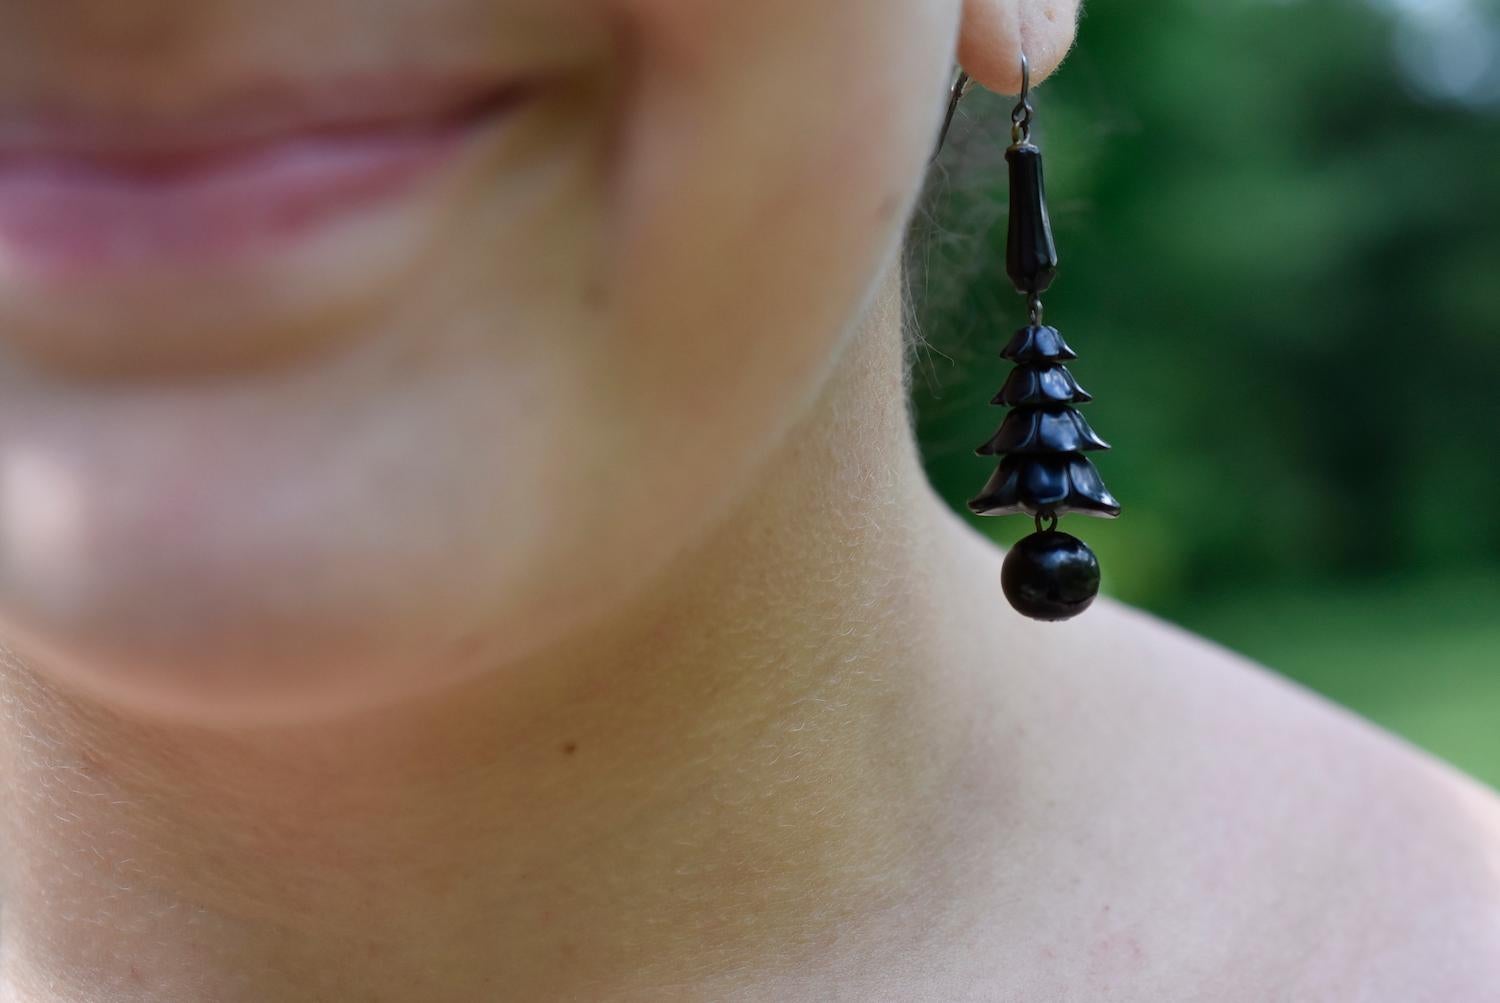 Fun and unusual earrings of Whitby jet with a jet ball hanging below carved Whitby jet florets. Whitby Jet is fossilized coal mined in Whitby, England in the 19th century and made into jet jewelry, used at the time for to create jewelry.  It was